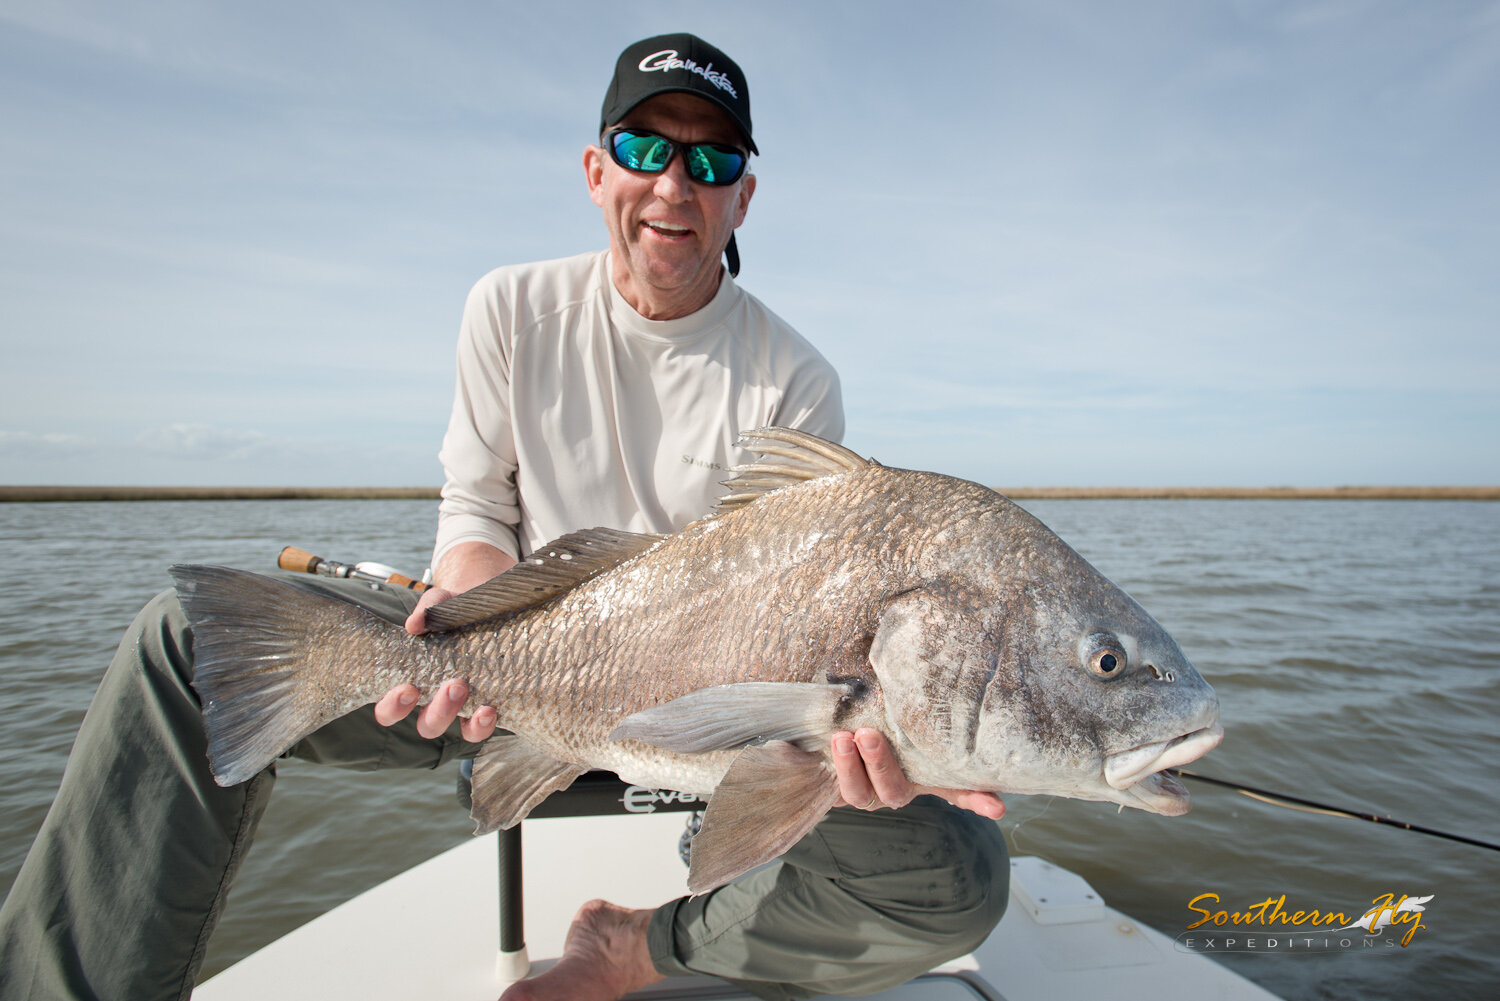 2020-03-12-13_SouthernFlyExpeditions_NewOrleans_DonKlingler-3.jpg